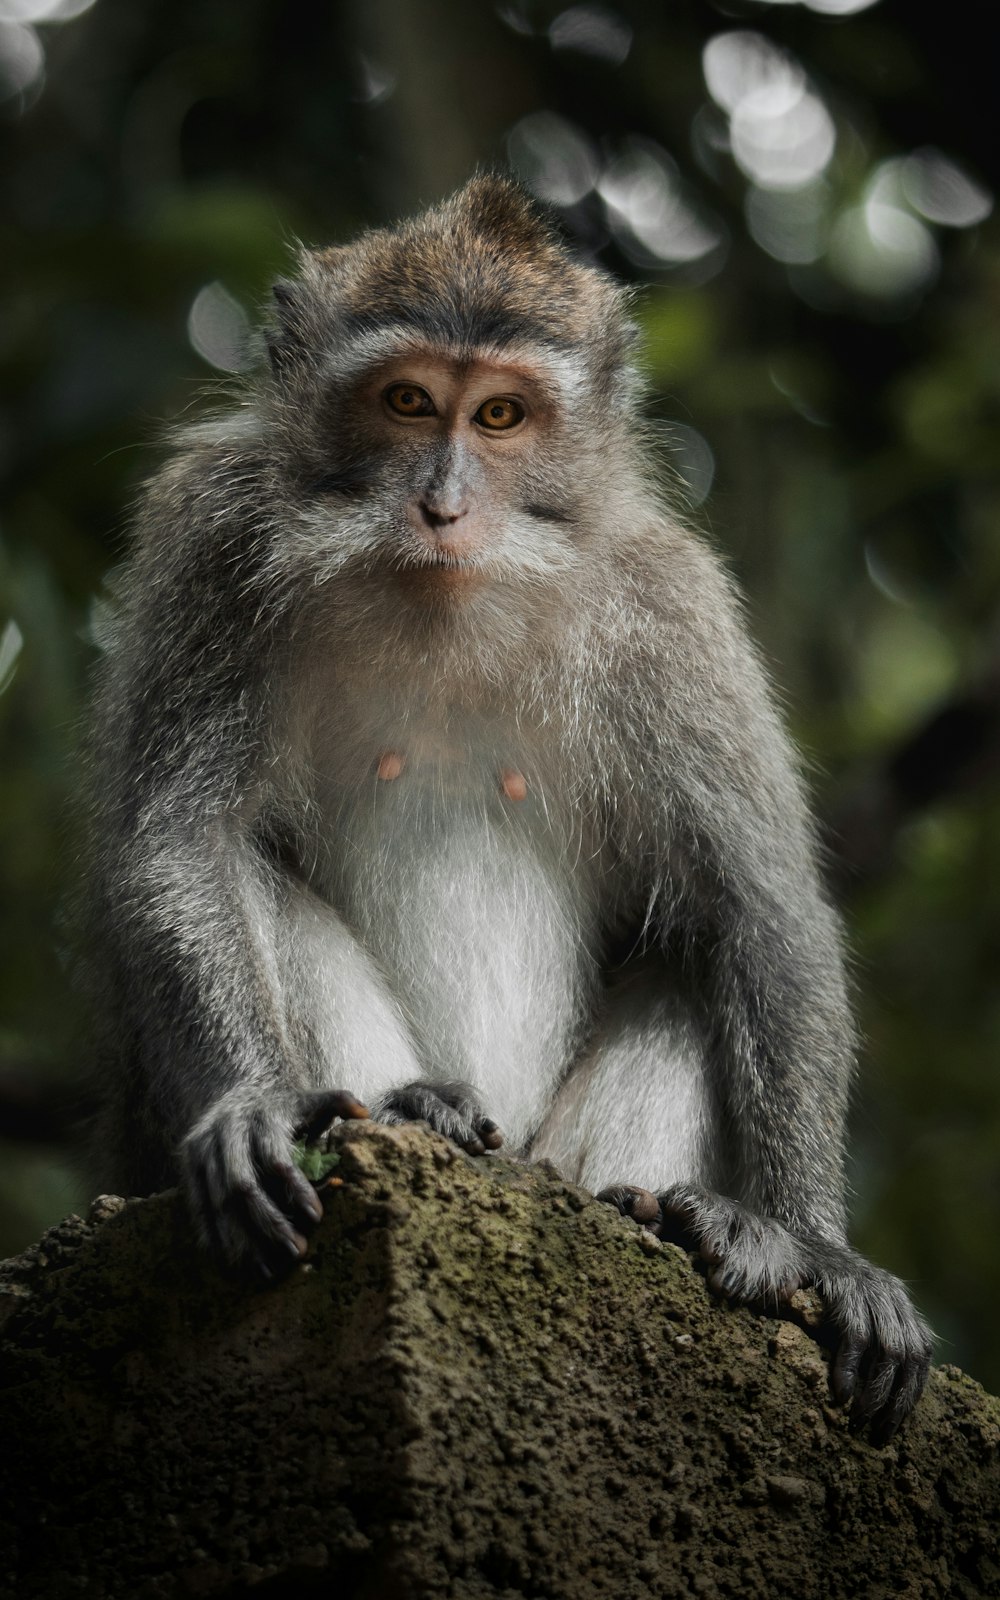 gray and white monkey on brown rock during daytime